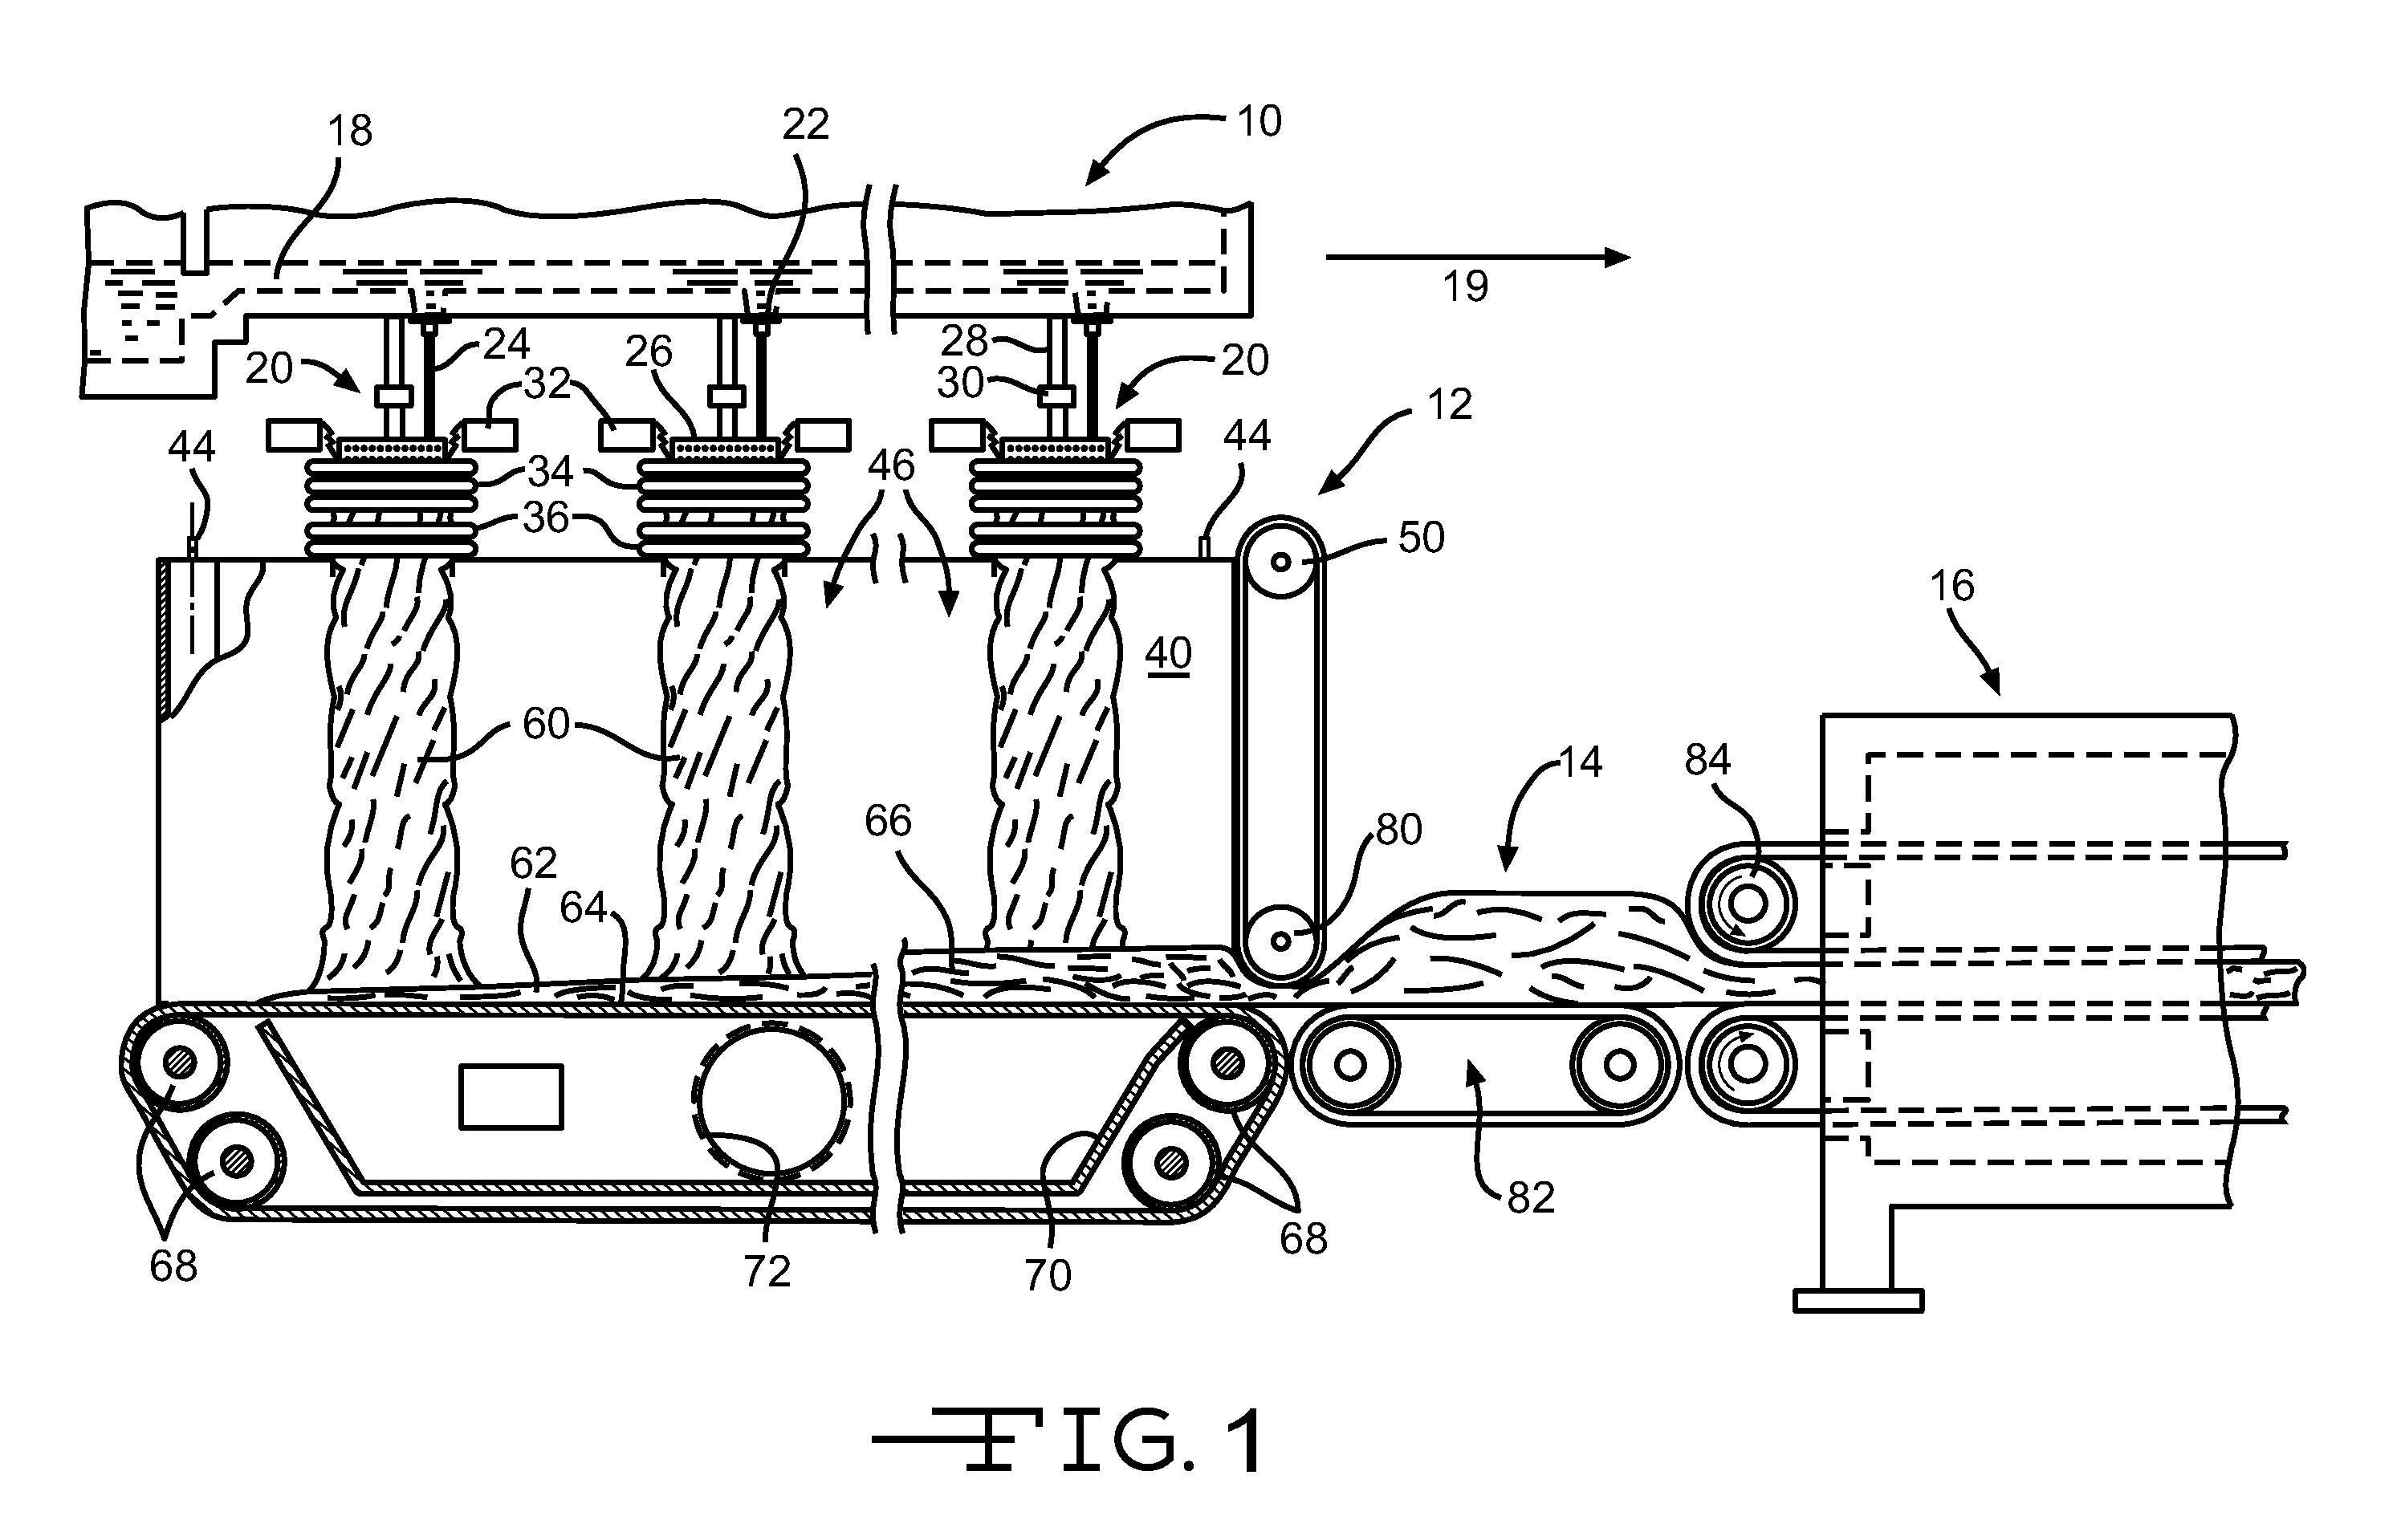 Apparatus and method for controlling moisture in the manufacture of glass fiber insulation